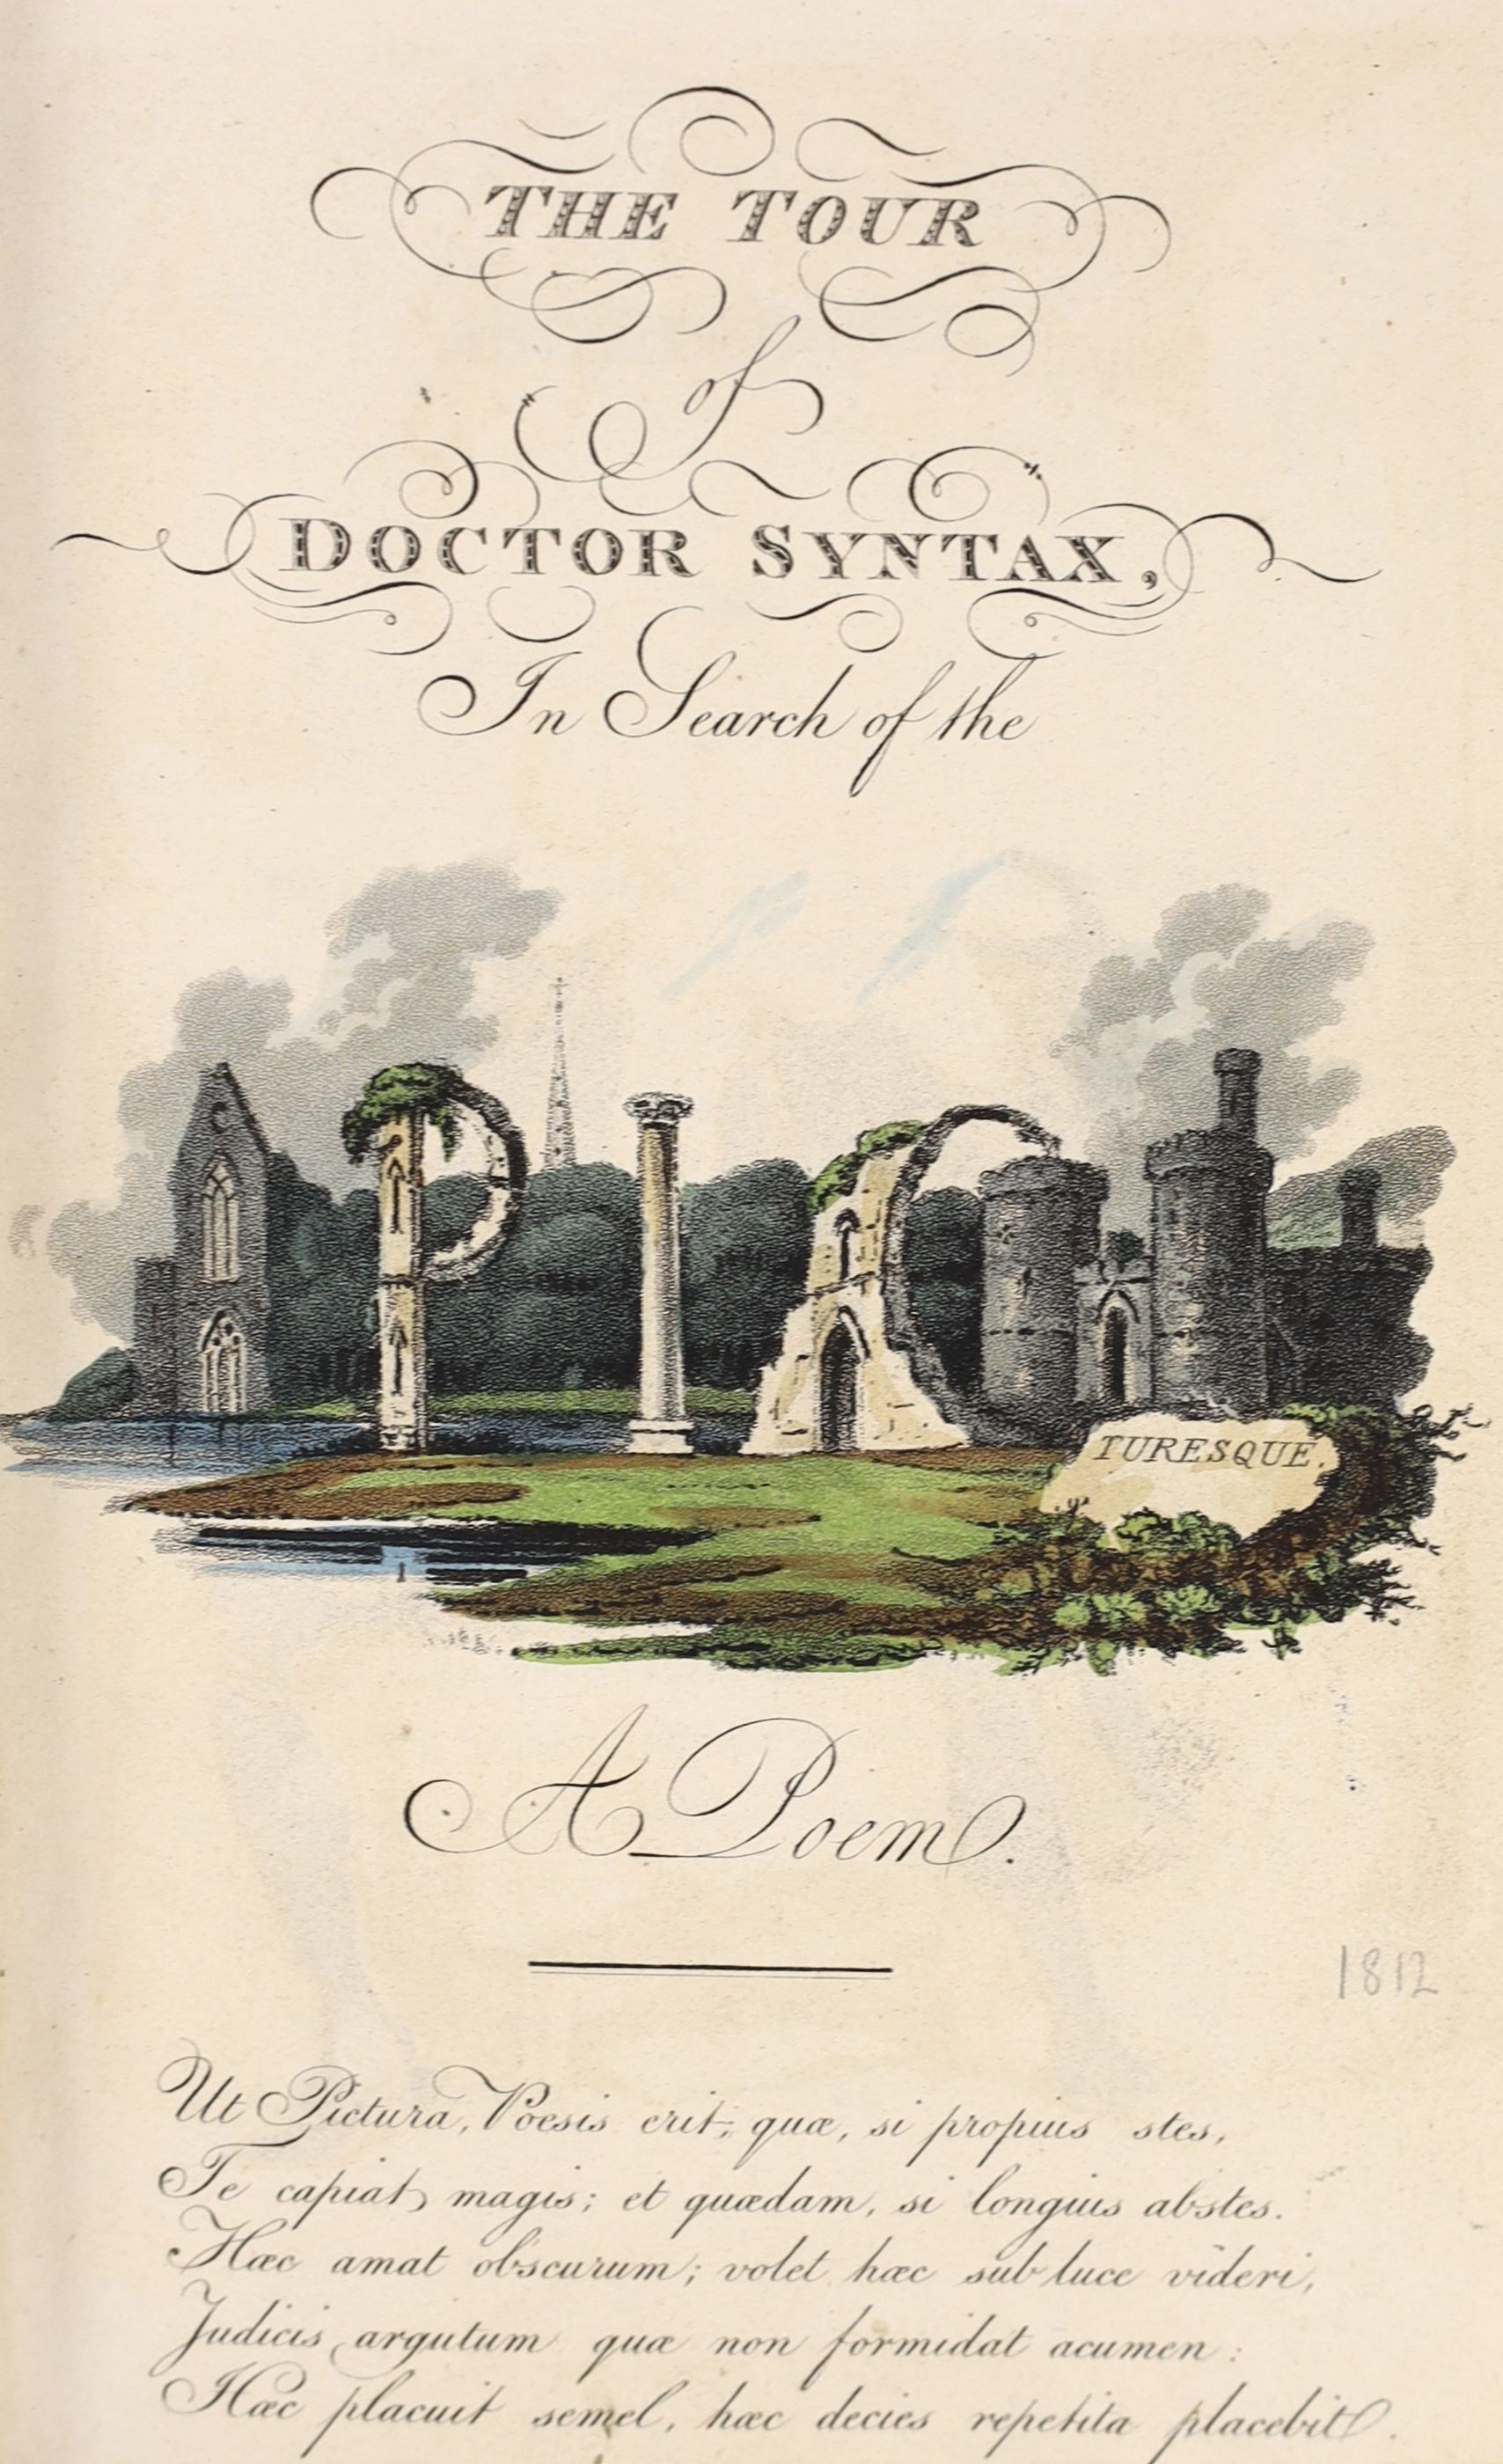 Coombe, William - The Tour of Doctor Syntax in Search of the Picturesque, 1st edition of text, with hand-coloured title and 30 aquatint plates, by Thomas Rowlandson, 8vo, half calf, London, 1812